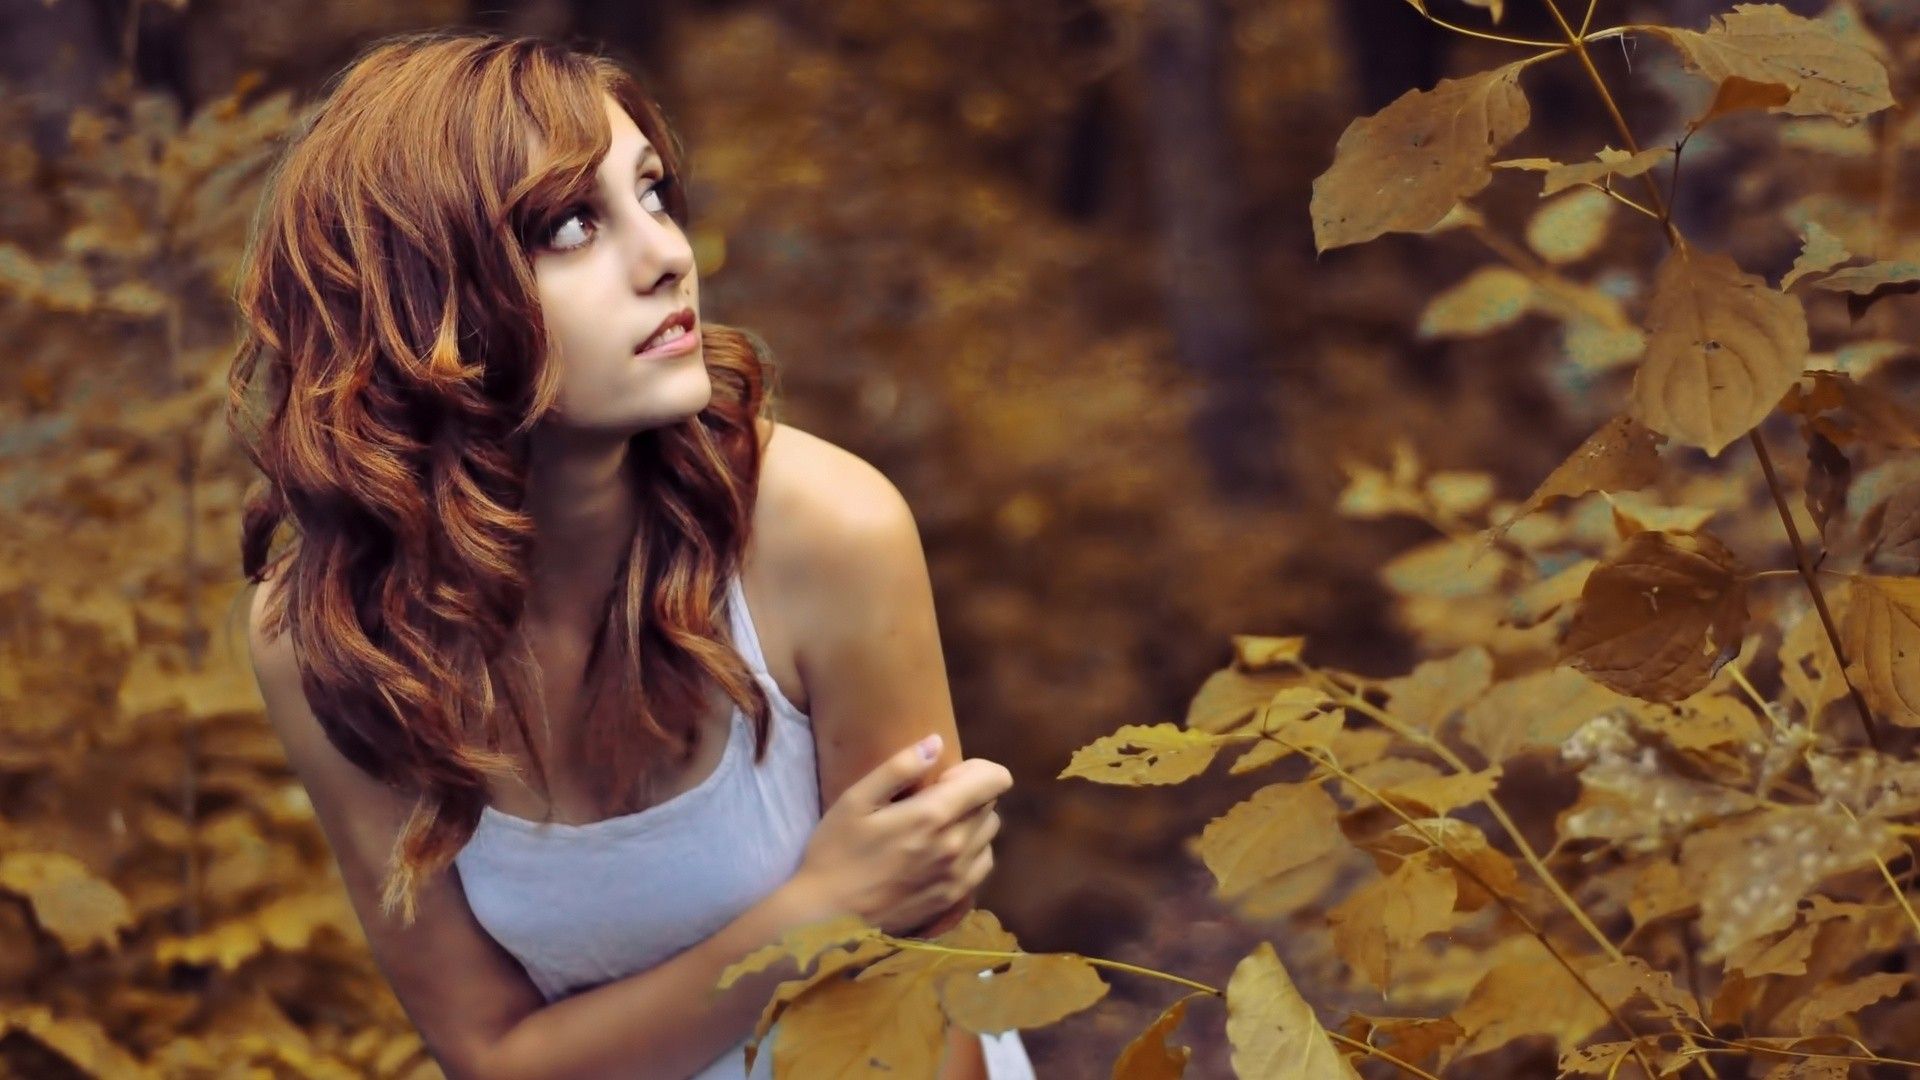 women, nature, trees, autumn, forests, redheads, models, parks wallpaper